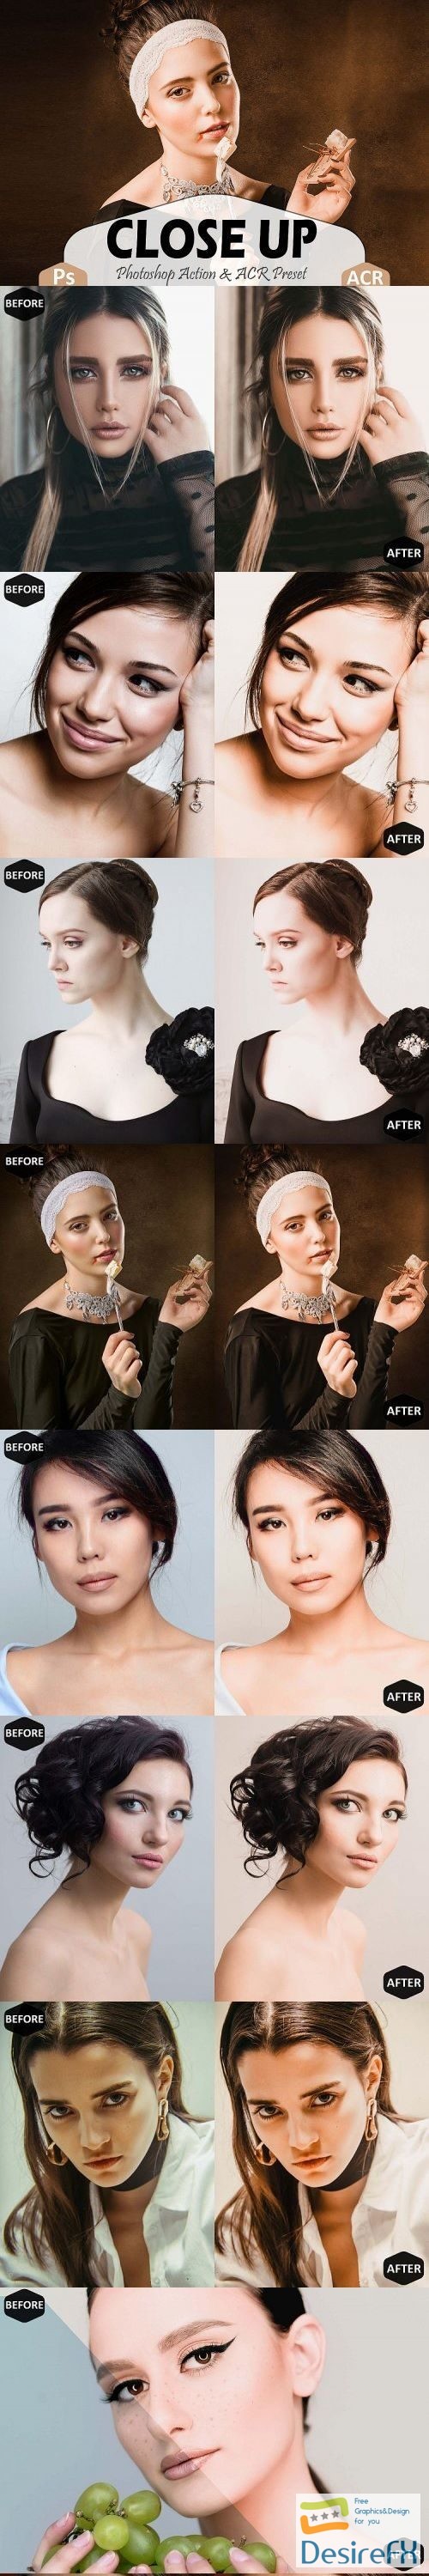 Close Up Photoshop Actions And ACR Presets, selfie Ps preset - 289064